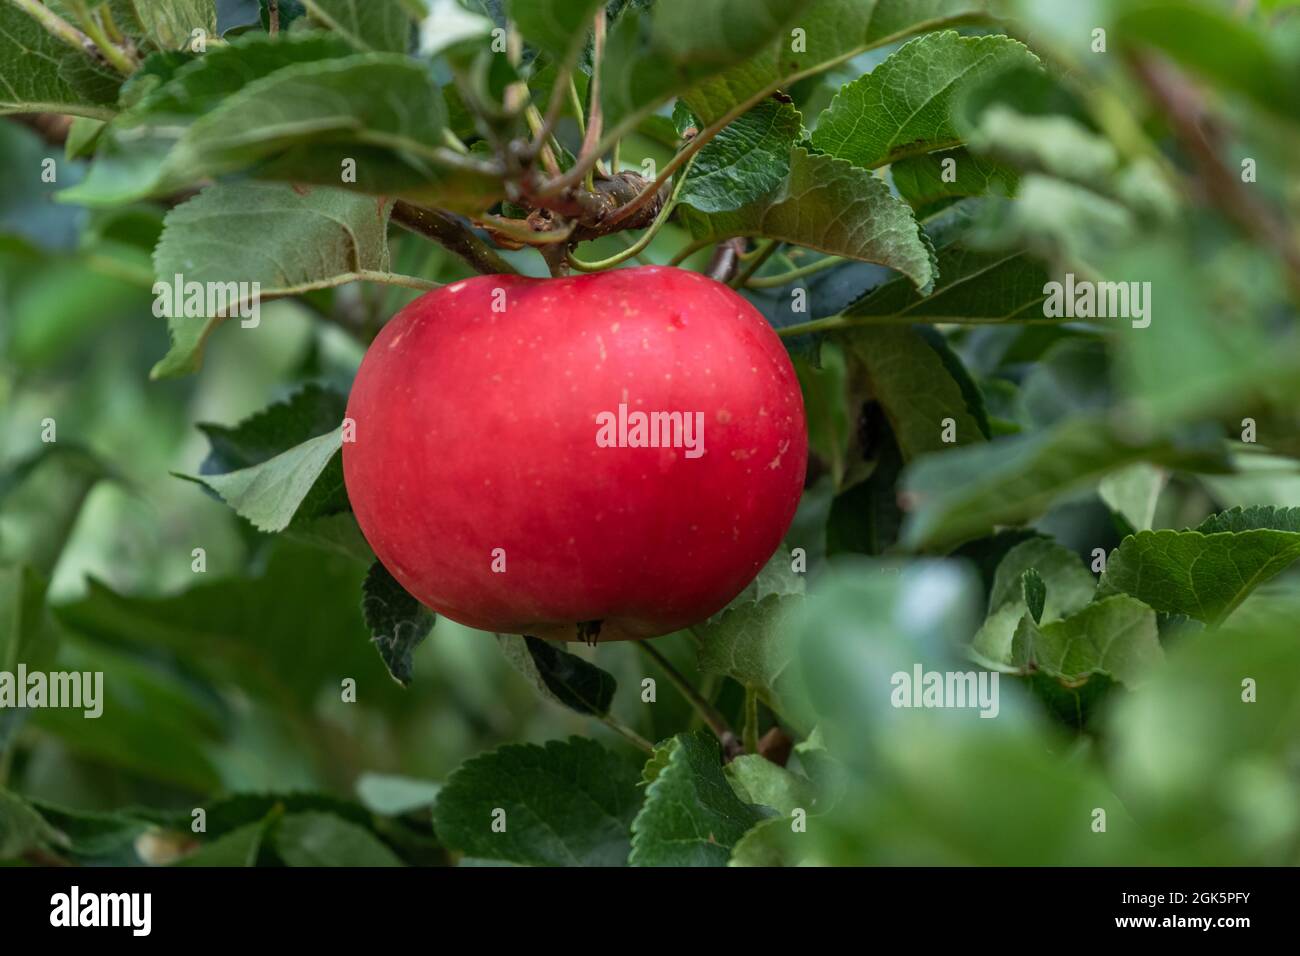 A red English discovery apple on a tree. Stock Photo